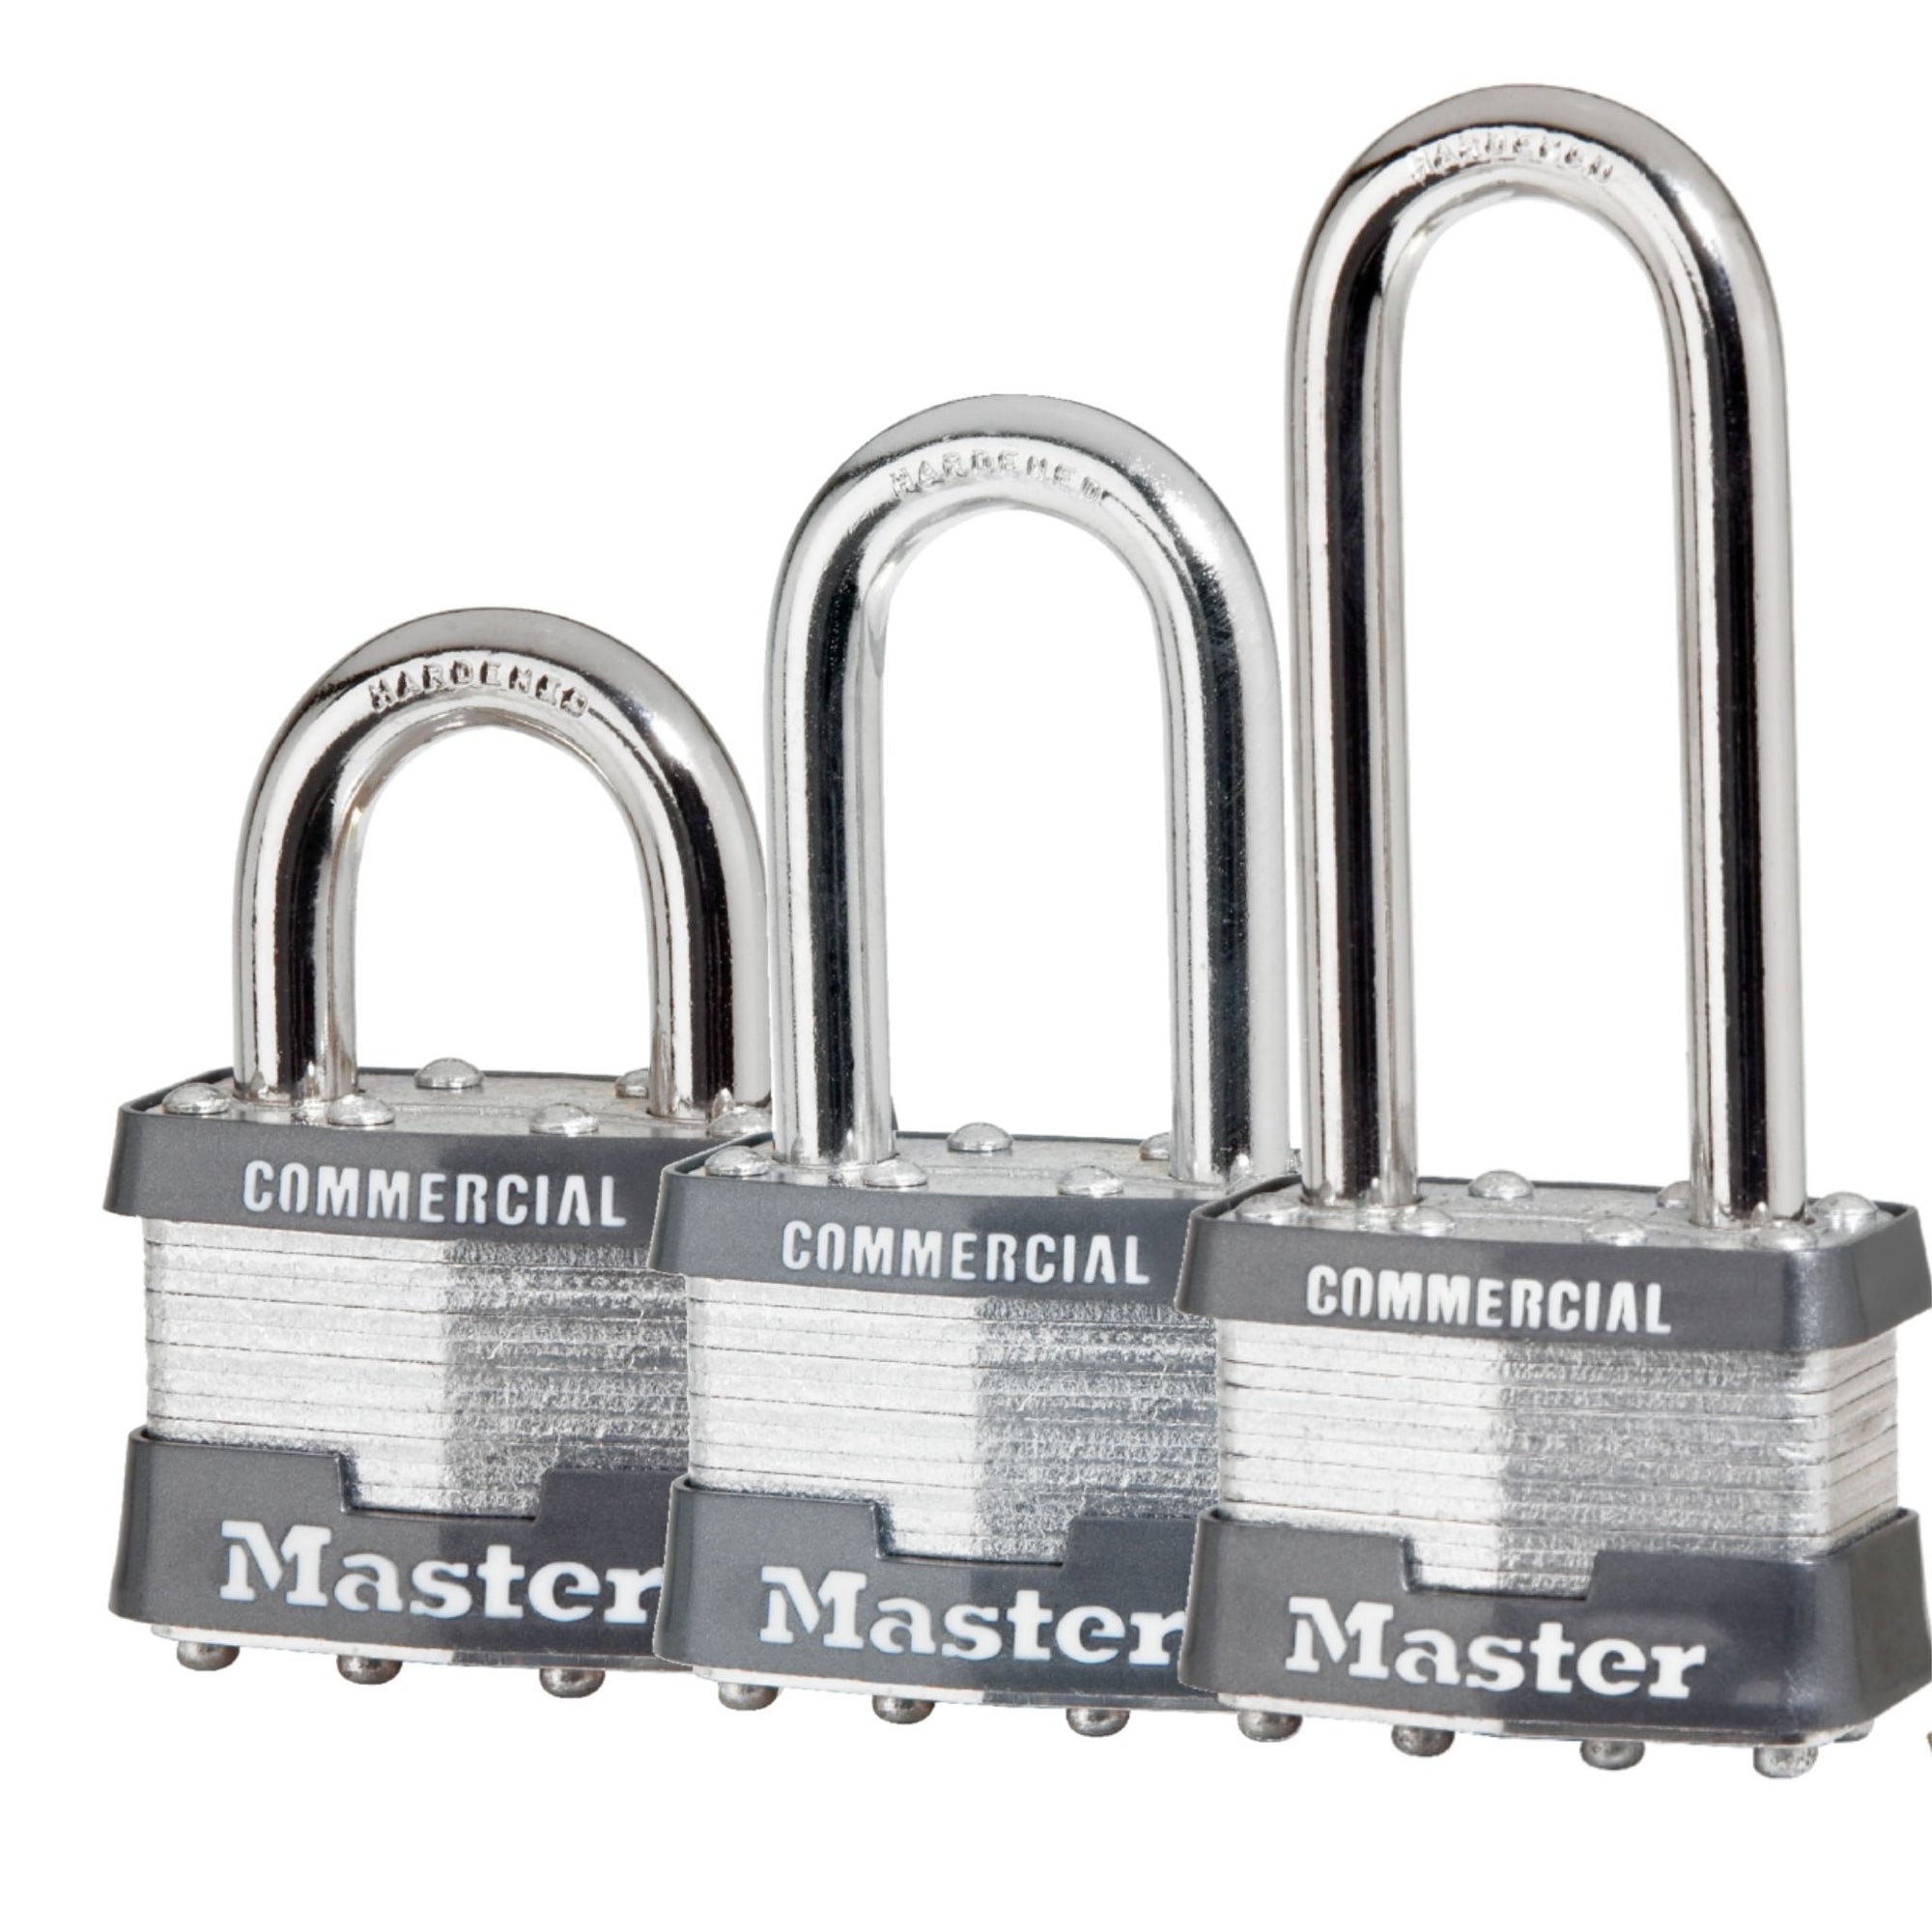 Pre-Keyed Locks Already Matched to Your Existing Key Number and Key System, Including Keyed Alike Padlocks and Master Keyed Locks from Abus & Master Lock - The Lock Source